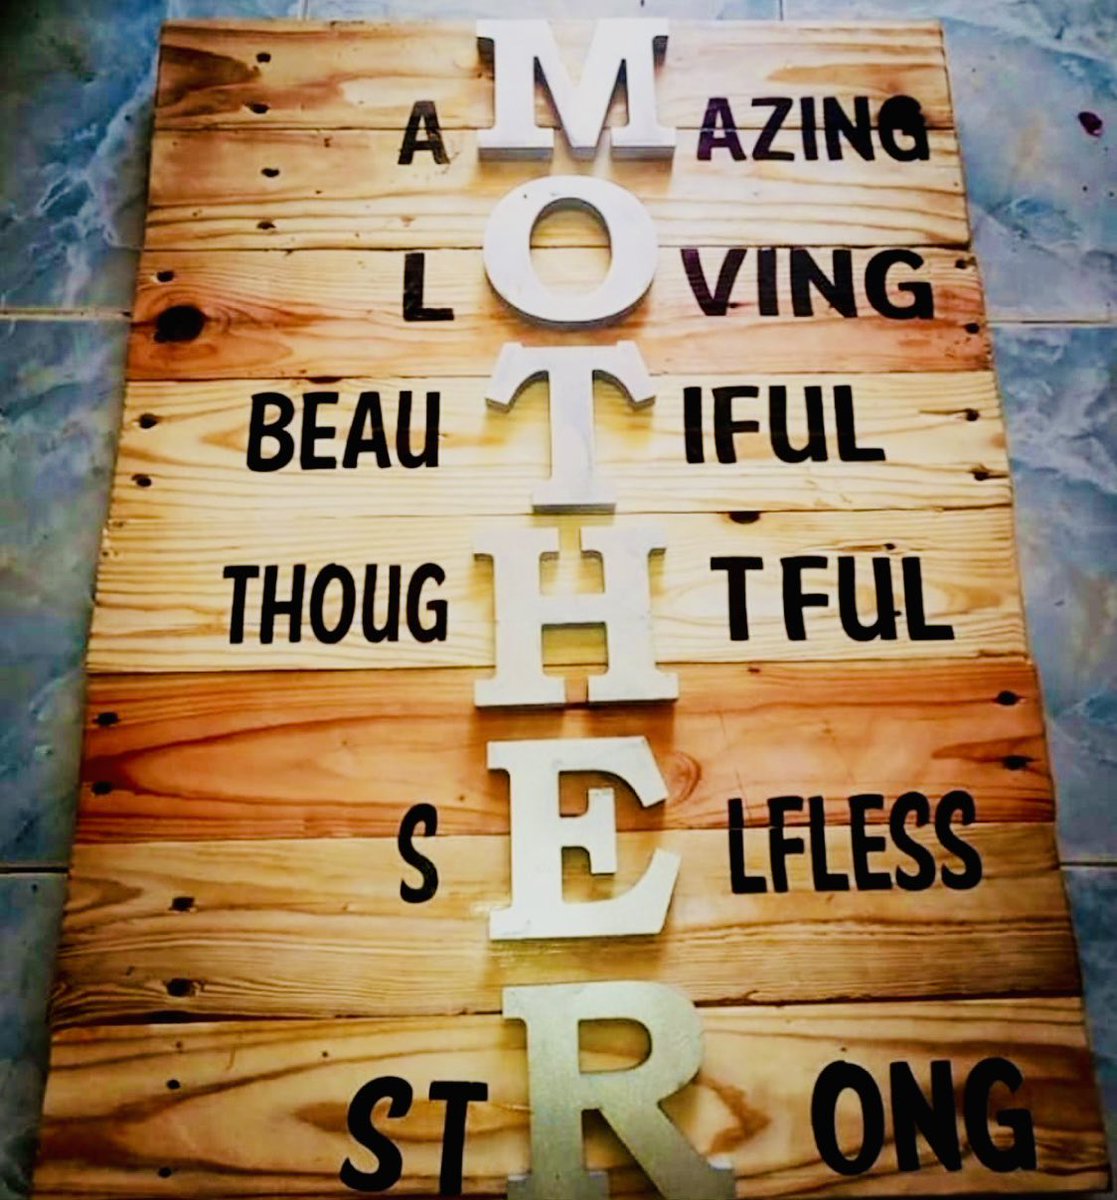 Capturing the essence of motherhood in this stunning wall art. The wooden backdrop and intricate engraving make it a perfect gift for all the incredible moms out there. #MotherhoodInspired #WallArt #WoodenEngraving #GiftsForMoms #LoveYouMom #MomsAreAmazing #CherishMoments #Home